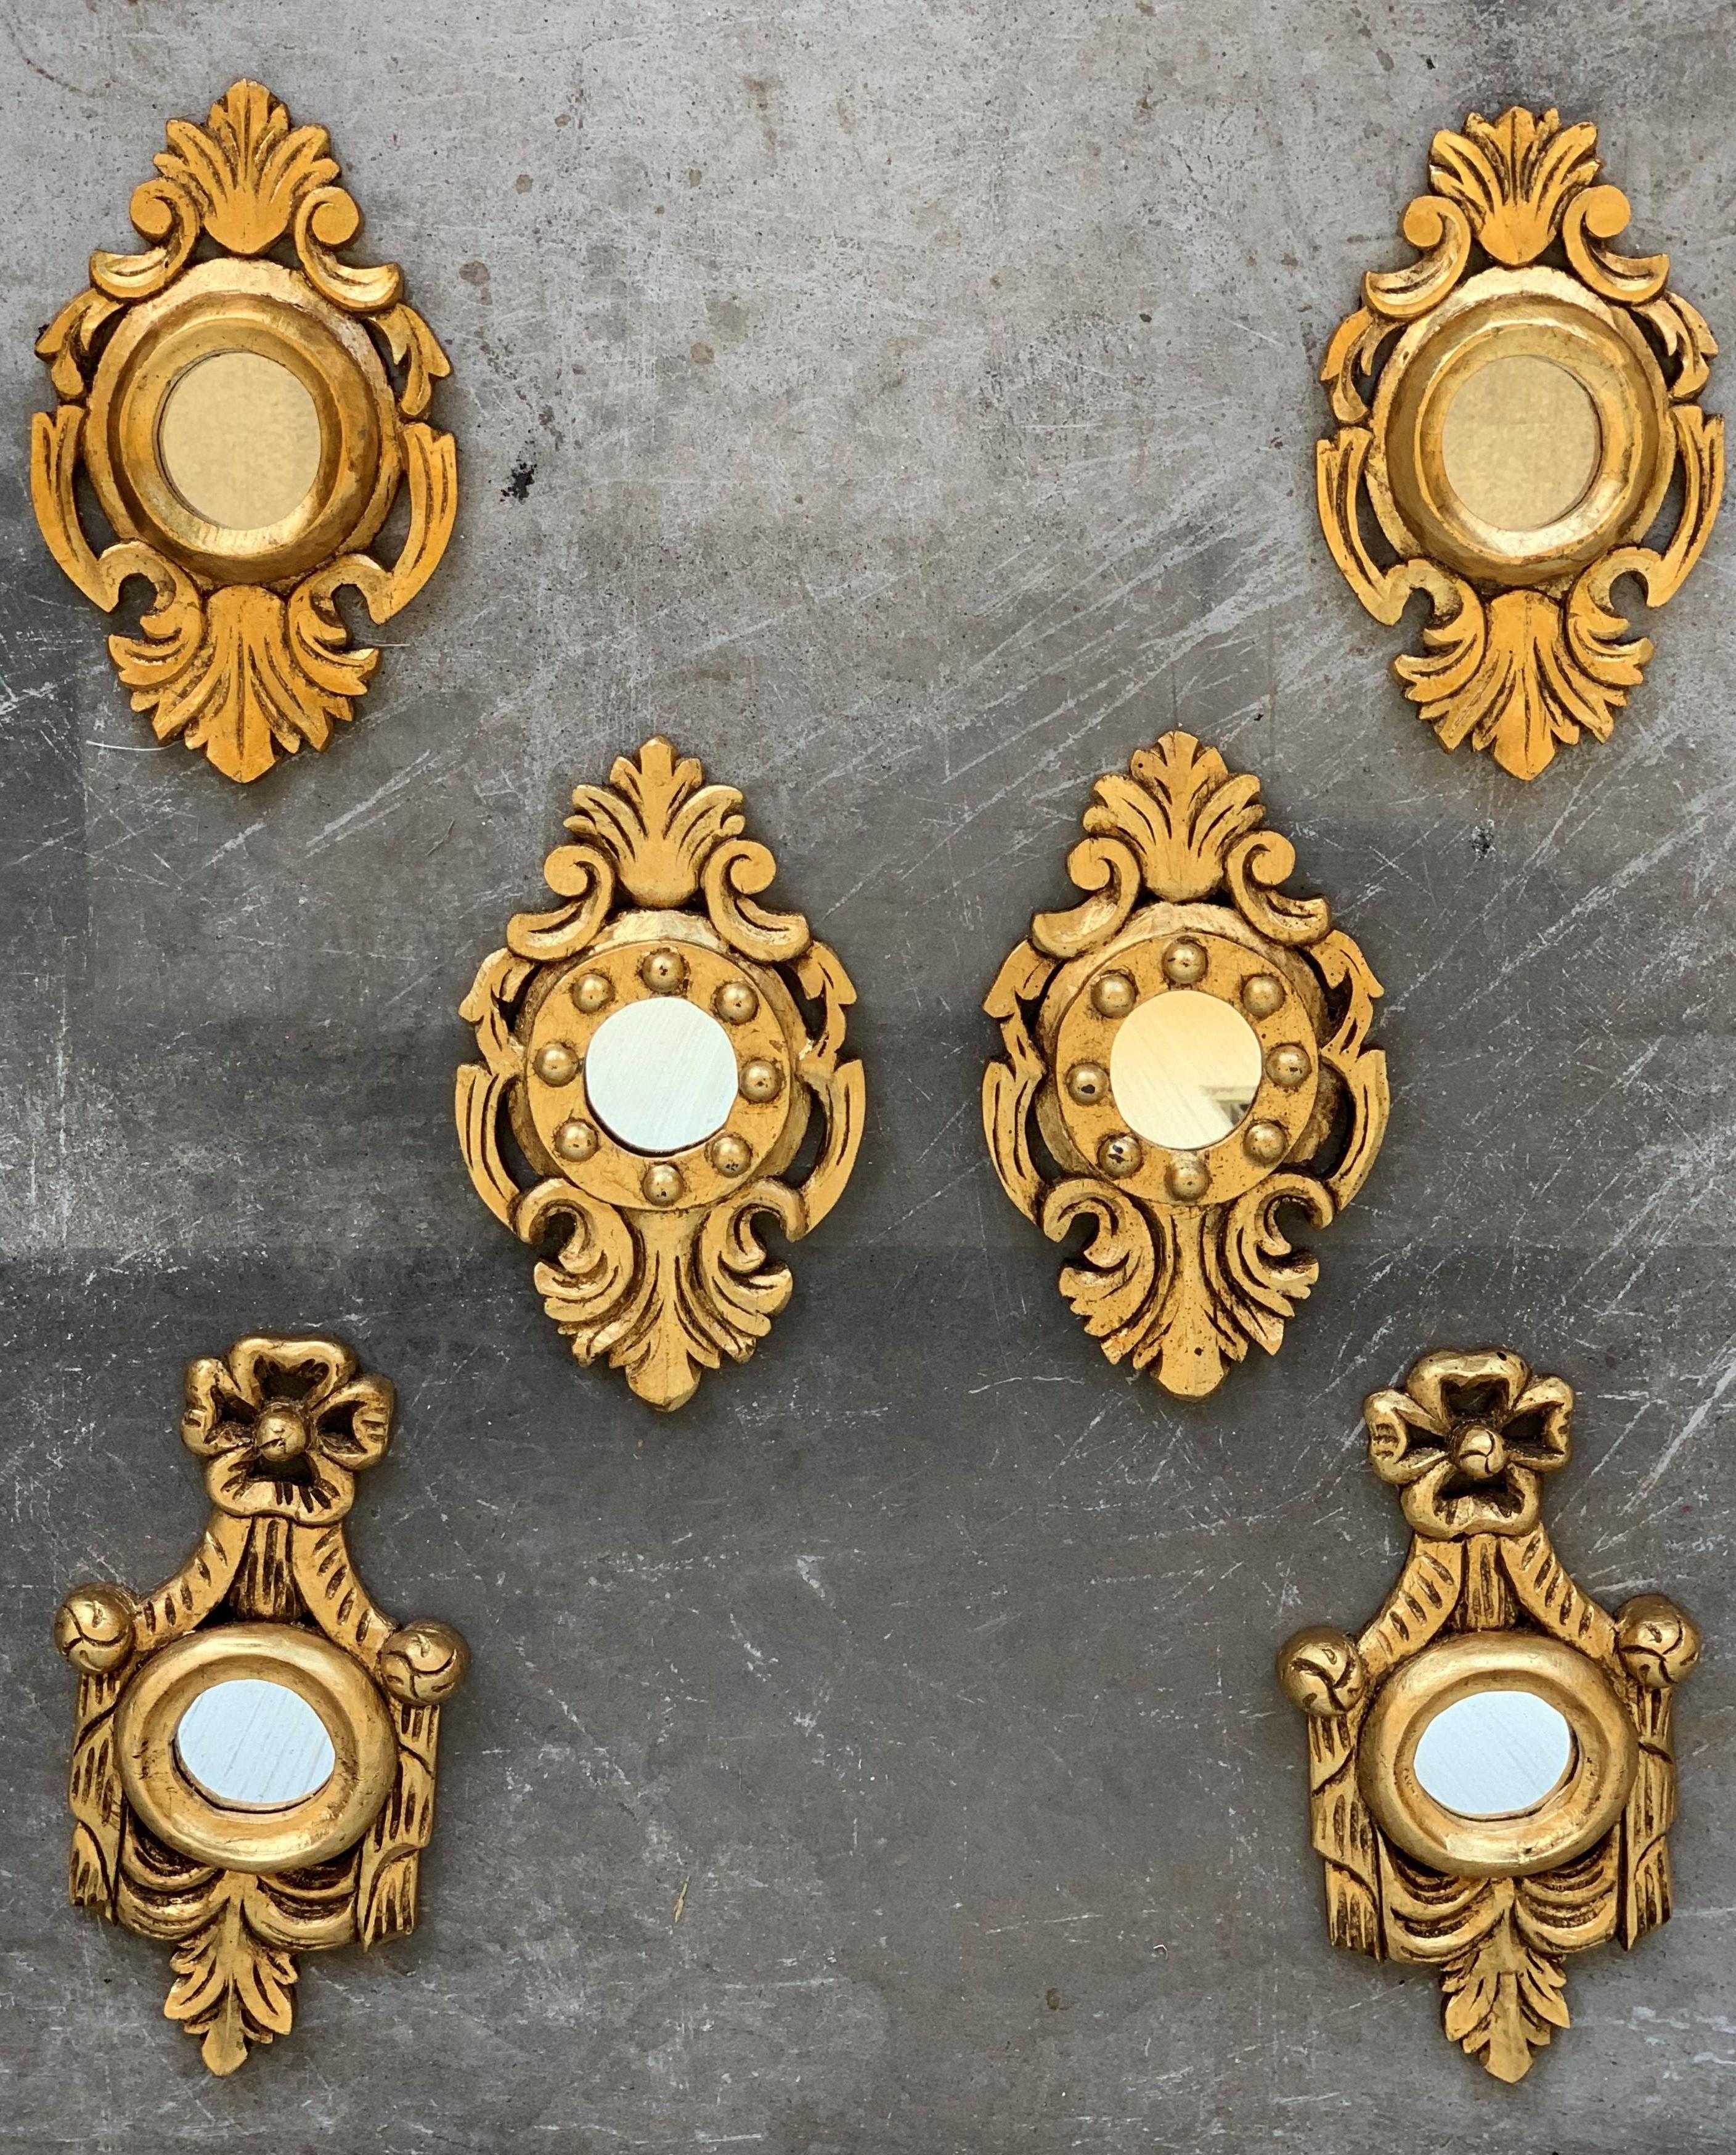 Exquisite Rococo style miniature carved mirrors with a crest on the top and carved naturalistic details at the frames. These pieces are unusual due to their size, they wear their original glasses and they are made of carved wood, gesso and 24-karat